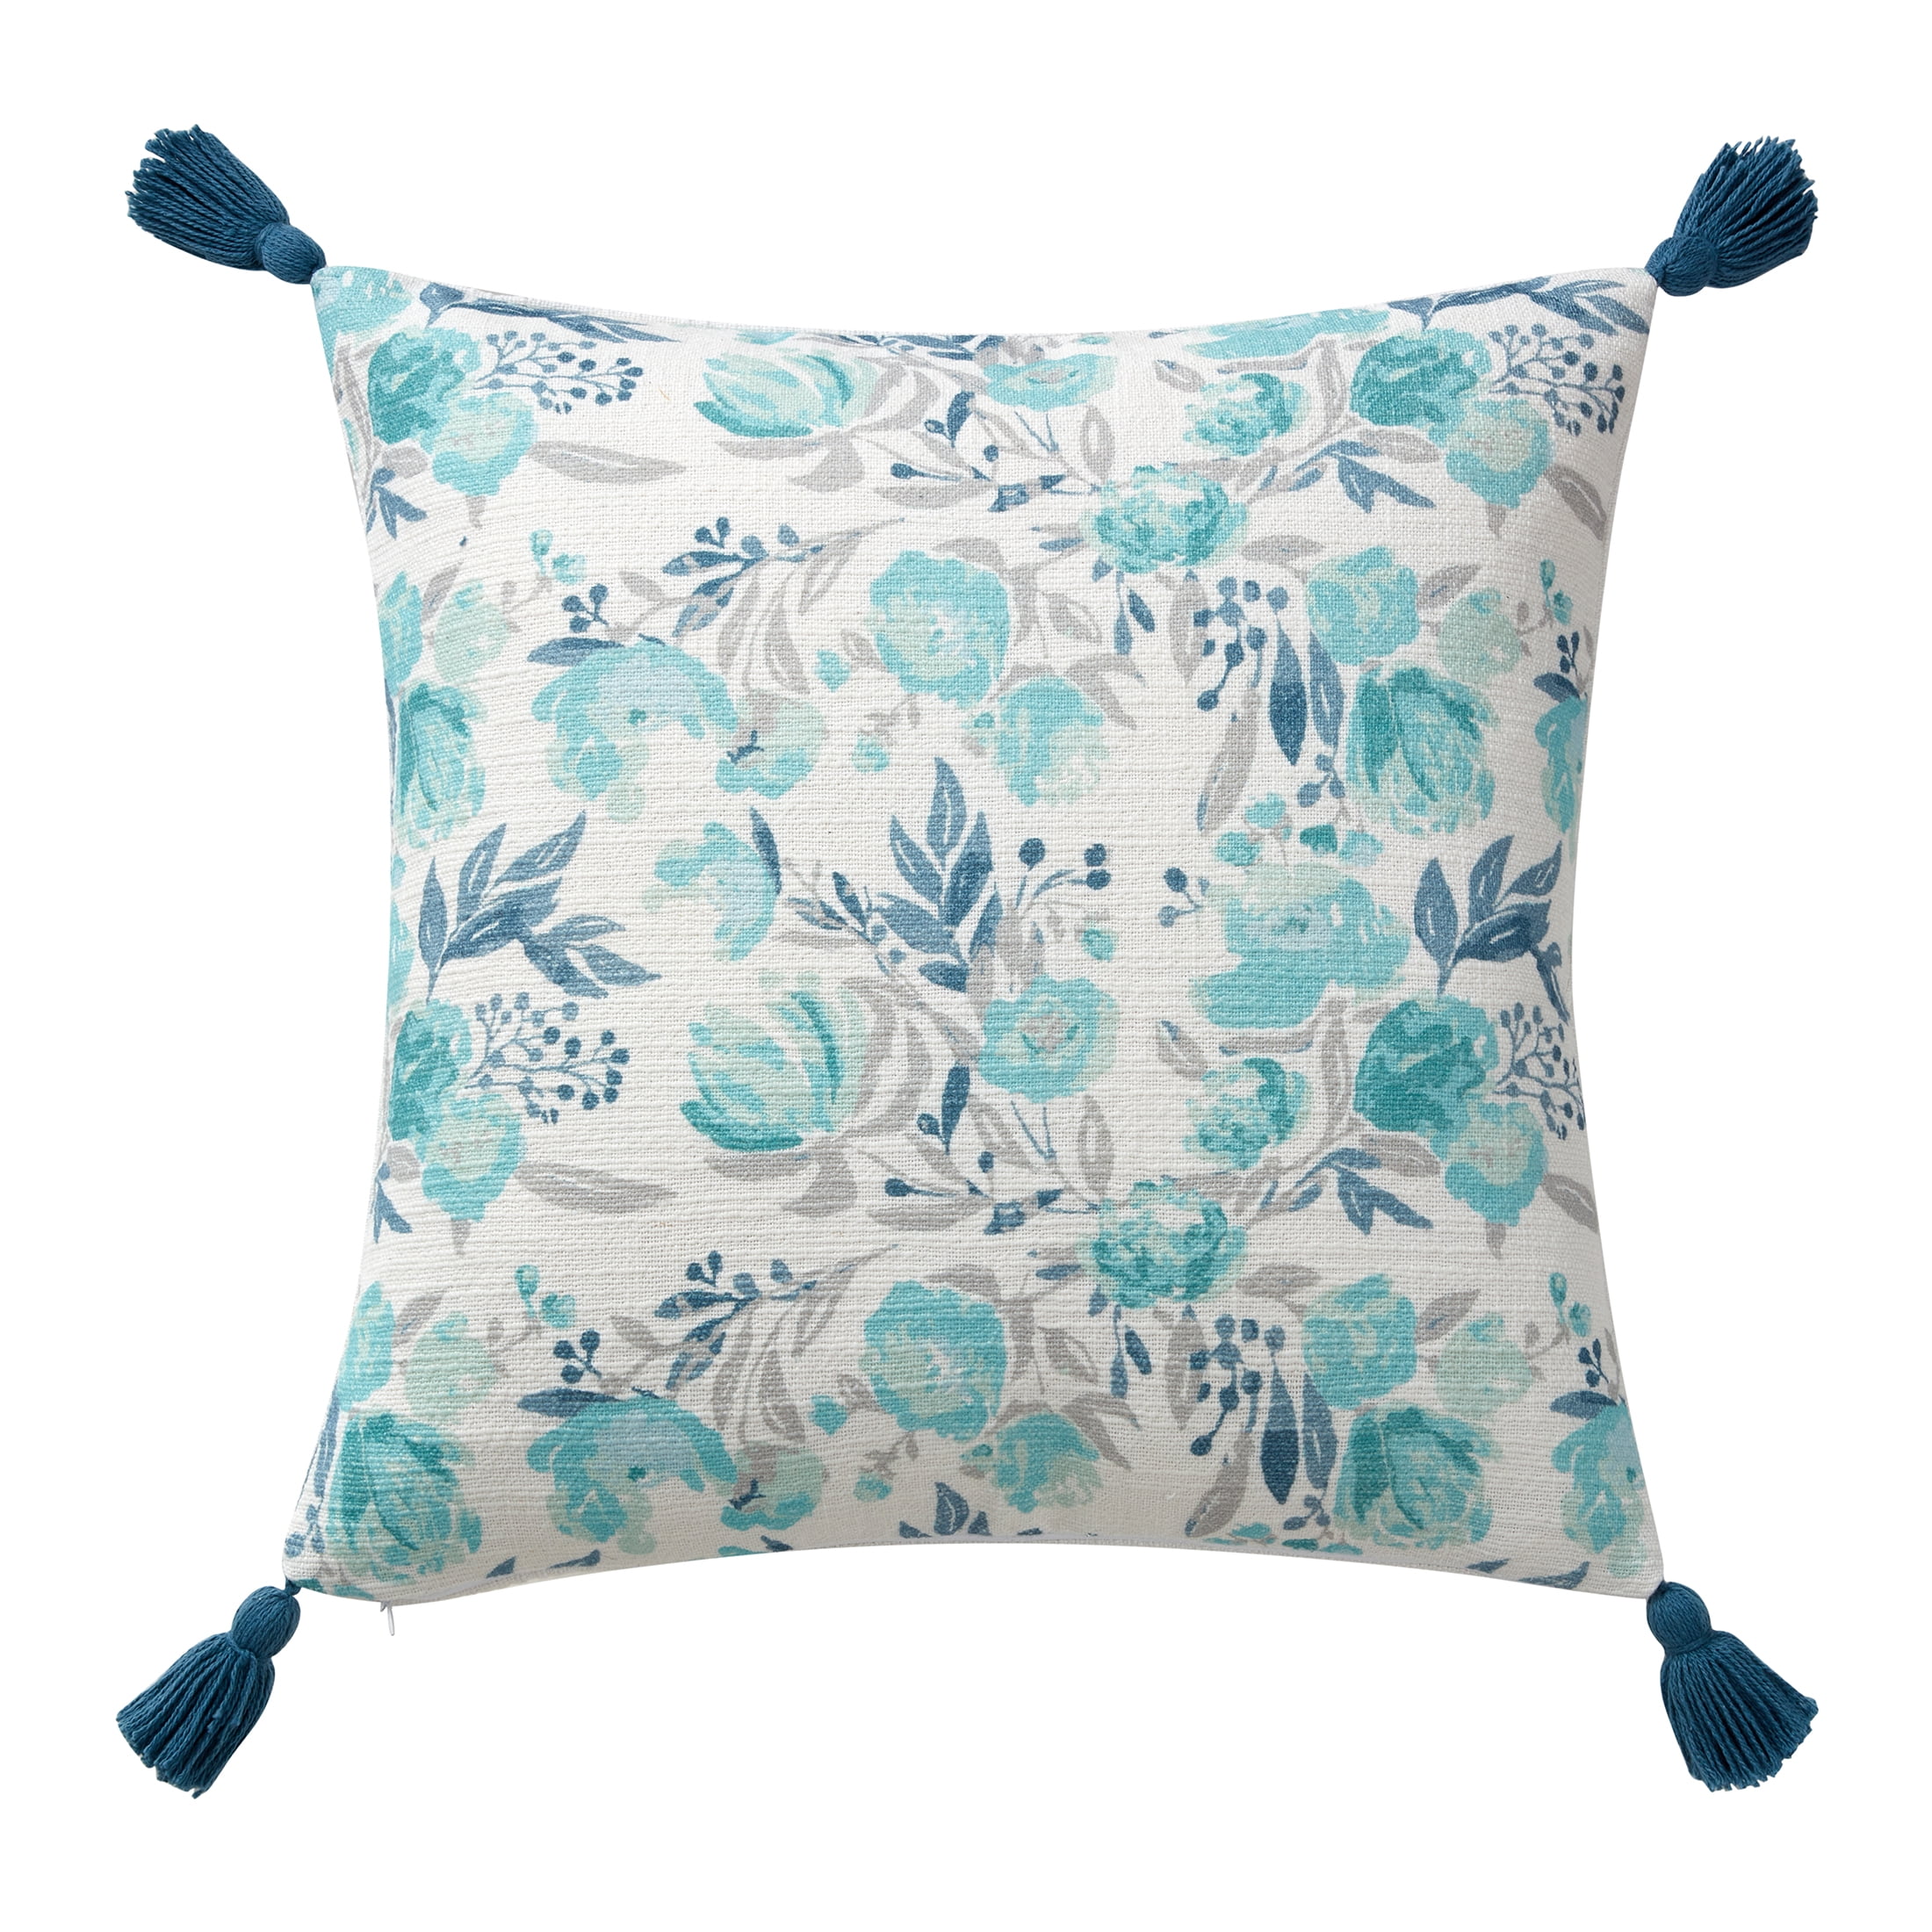 Serena floral jacquard cushion covers,43 cms 3 cols,filled cushions available. 